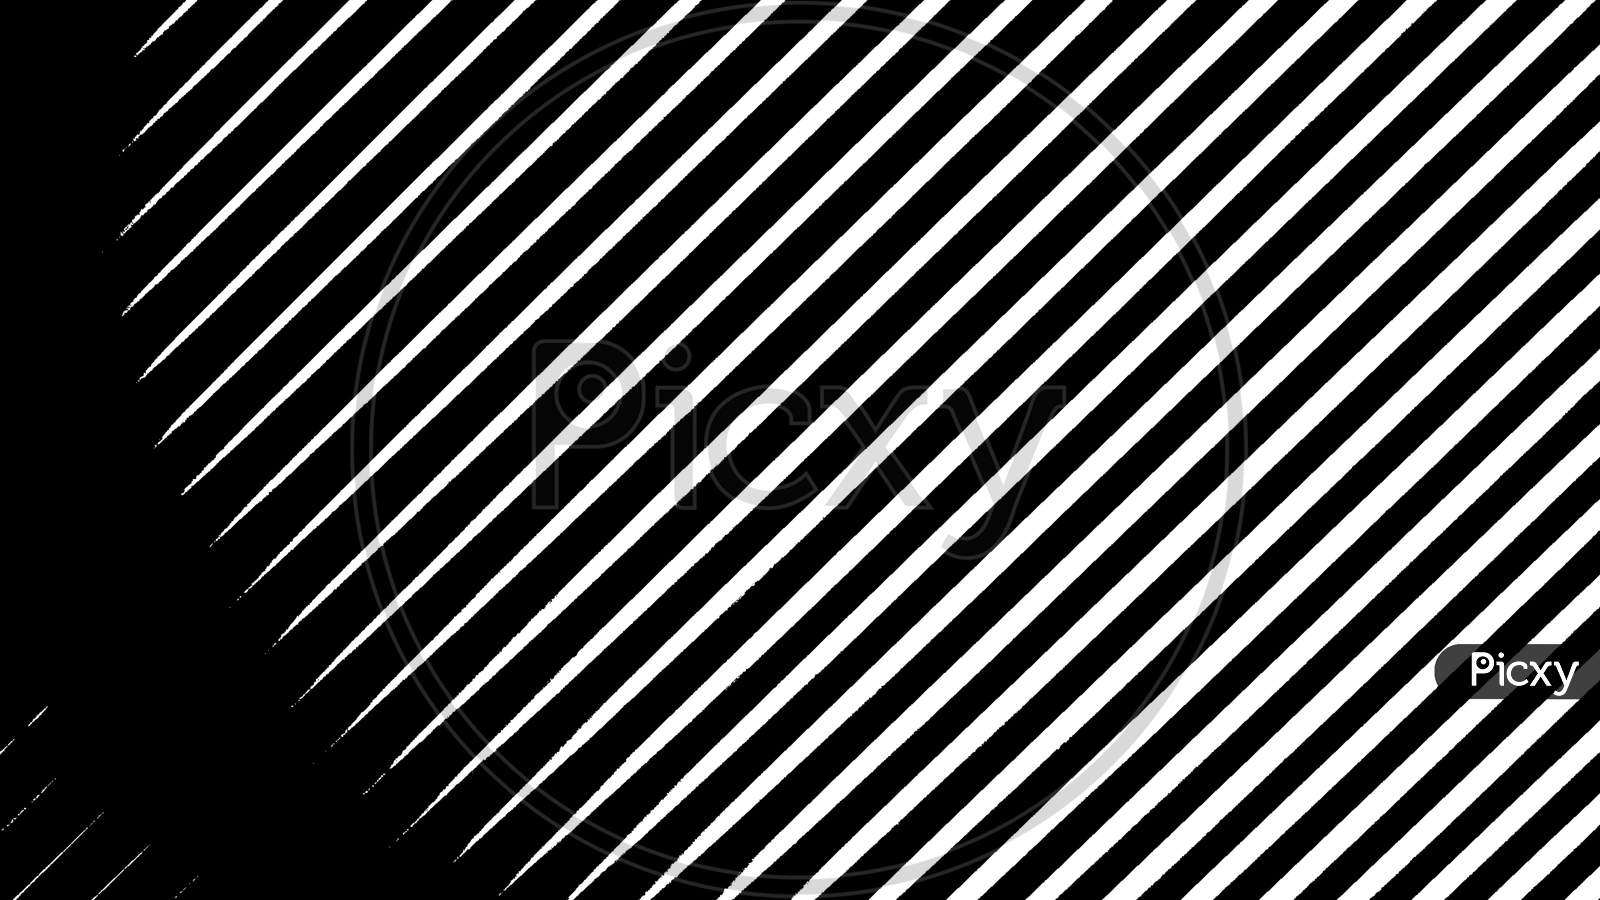 A creative line design abstract in black background.